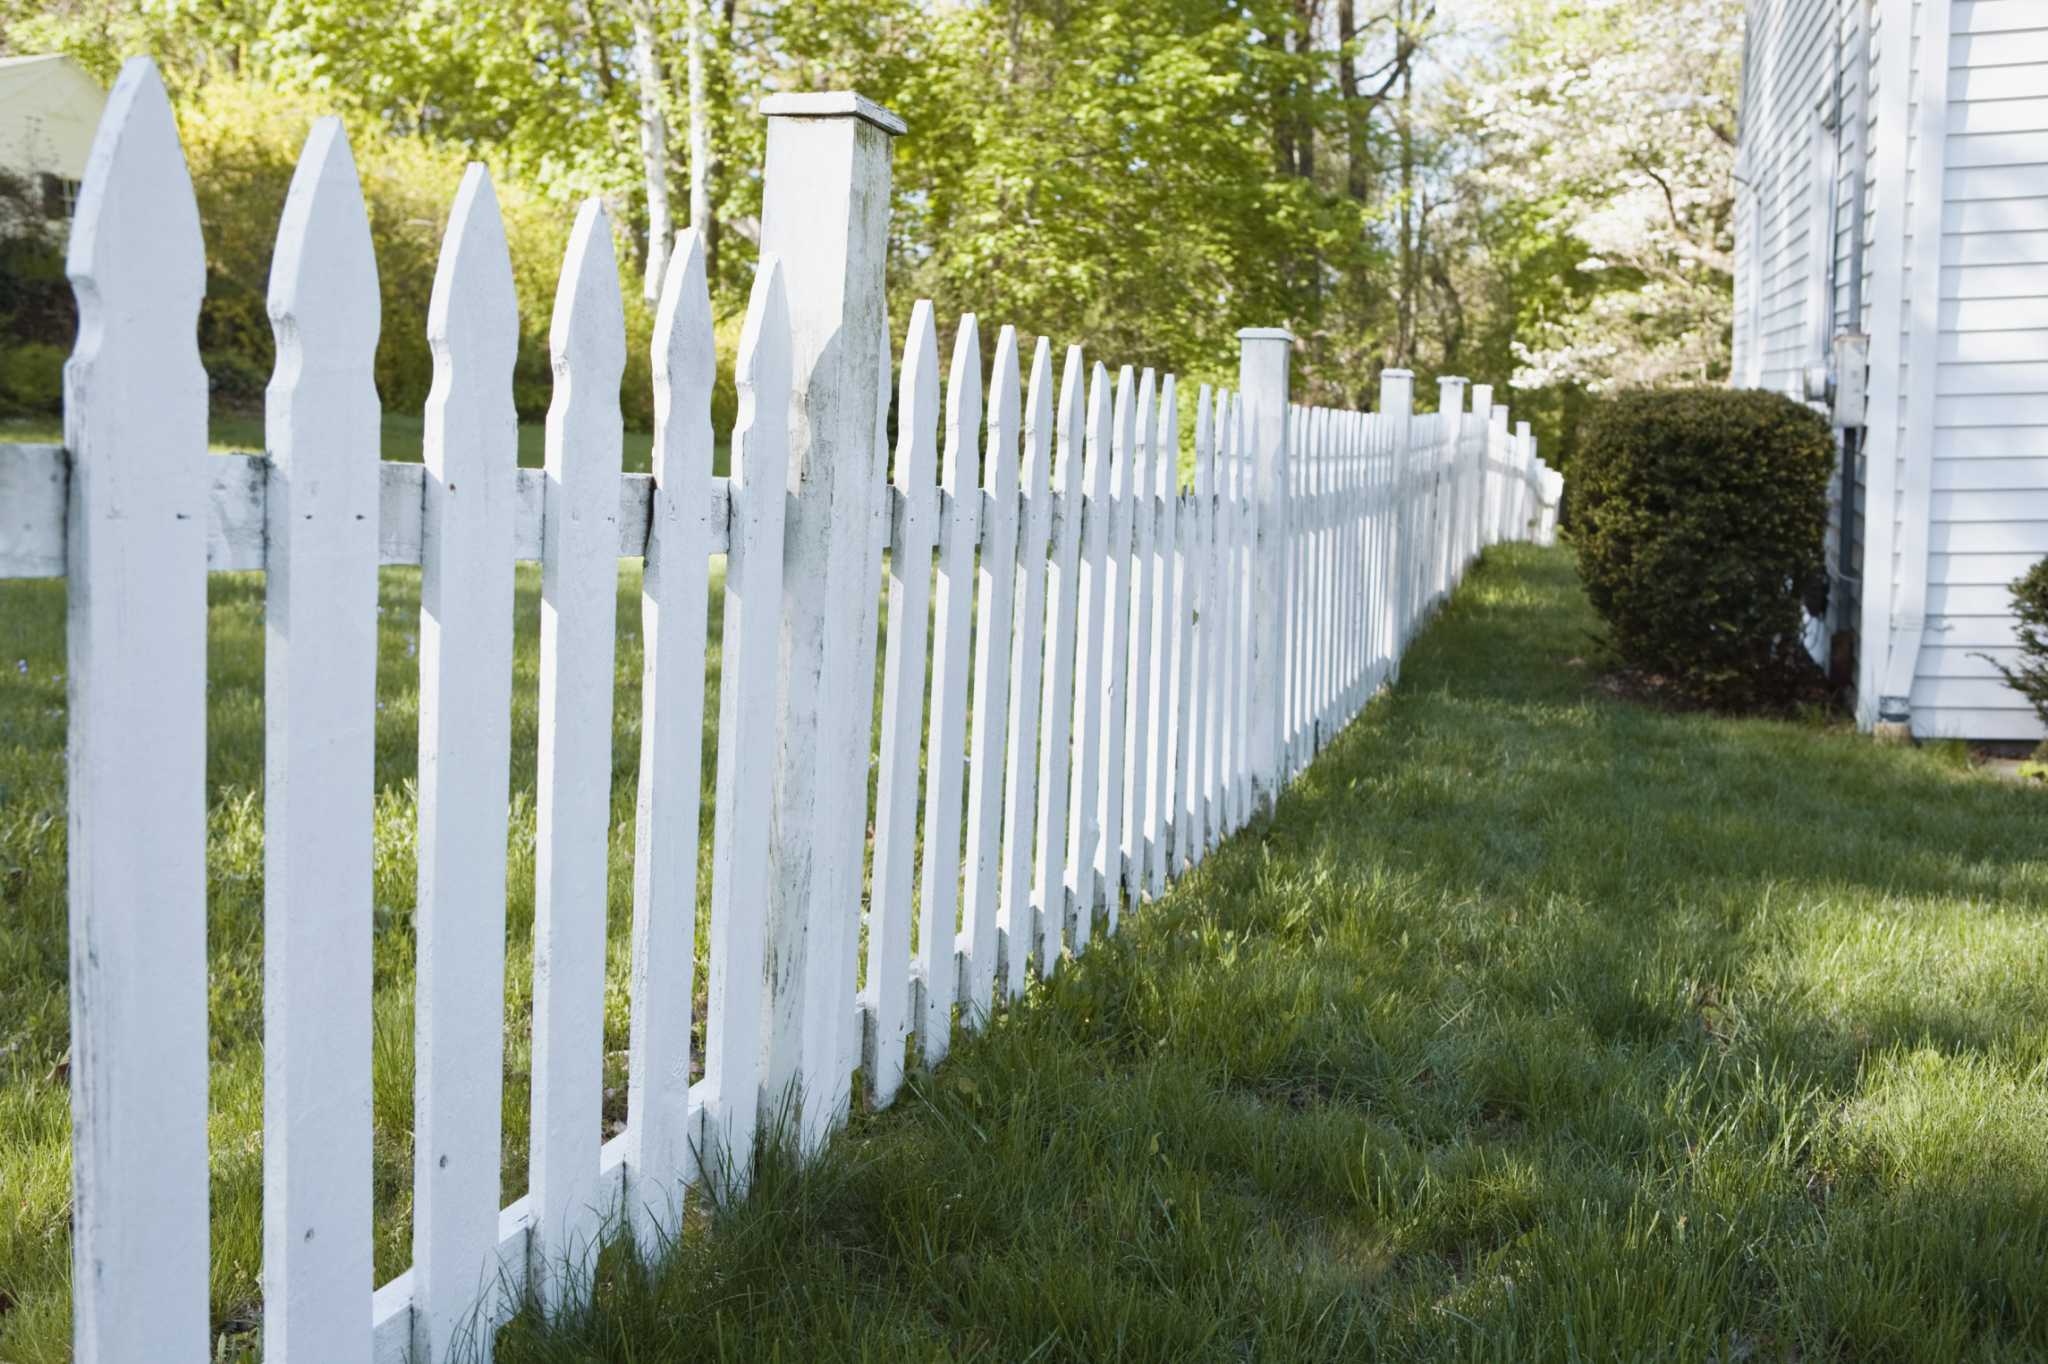 How To Keep Neighbors’ Grass From Growing Under Fence